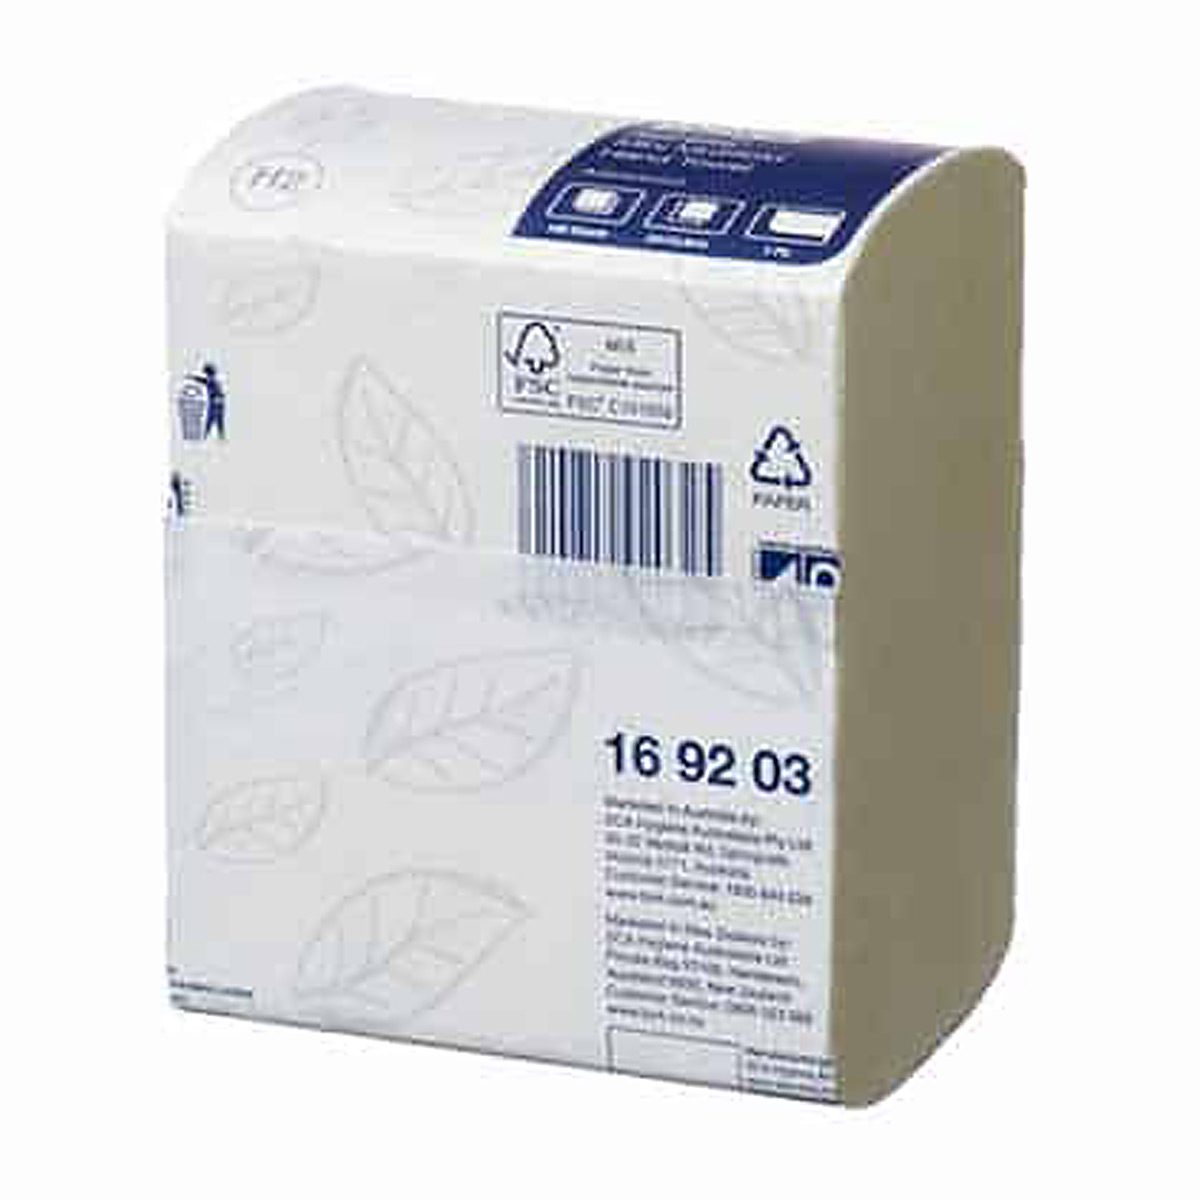 paper-products-paper-towels-tork-mini-multifold-hand-towel-advanced-white-1ply-185-sheets-42-packs-t3-half-sized-hand-towel-creates-less-waste-childcare centres-vjs-distributors-169203